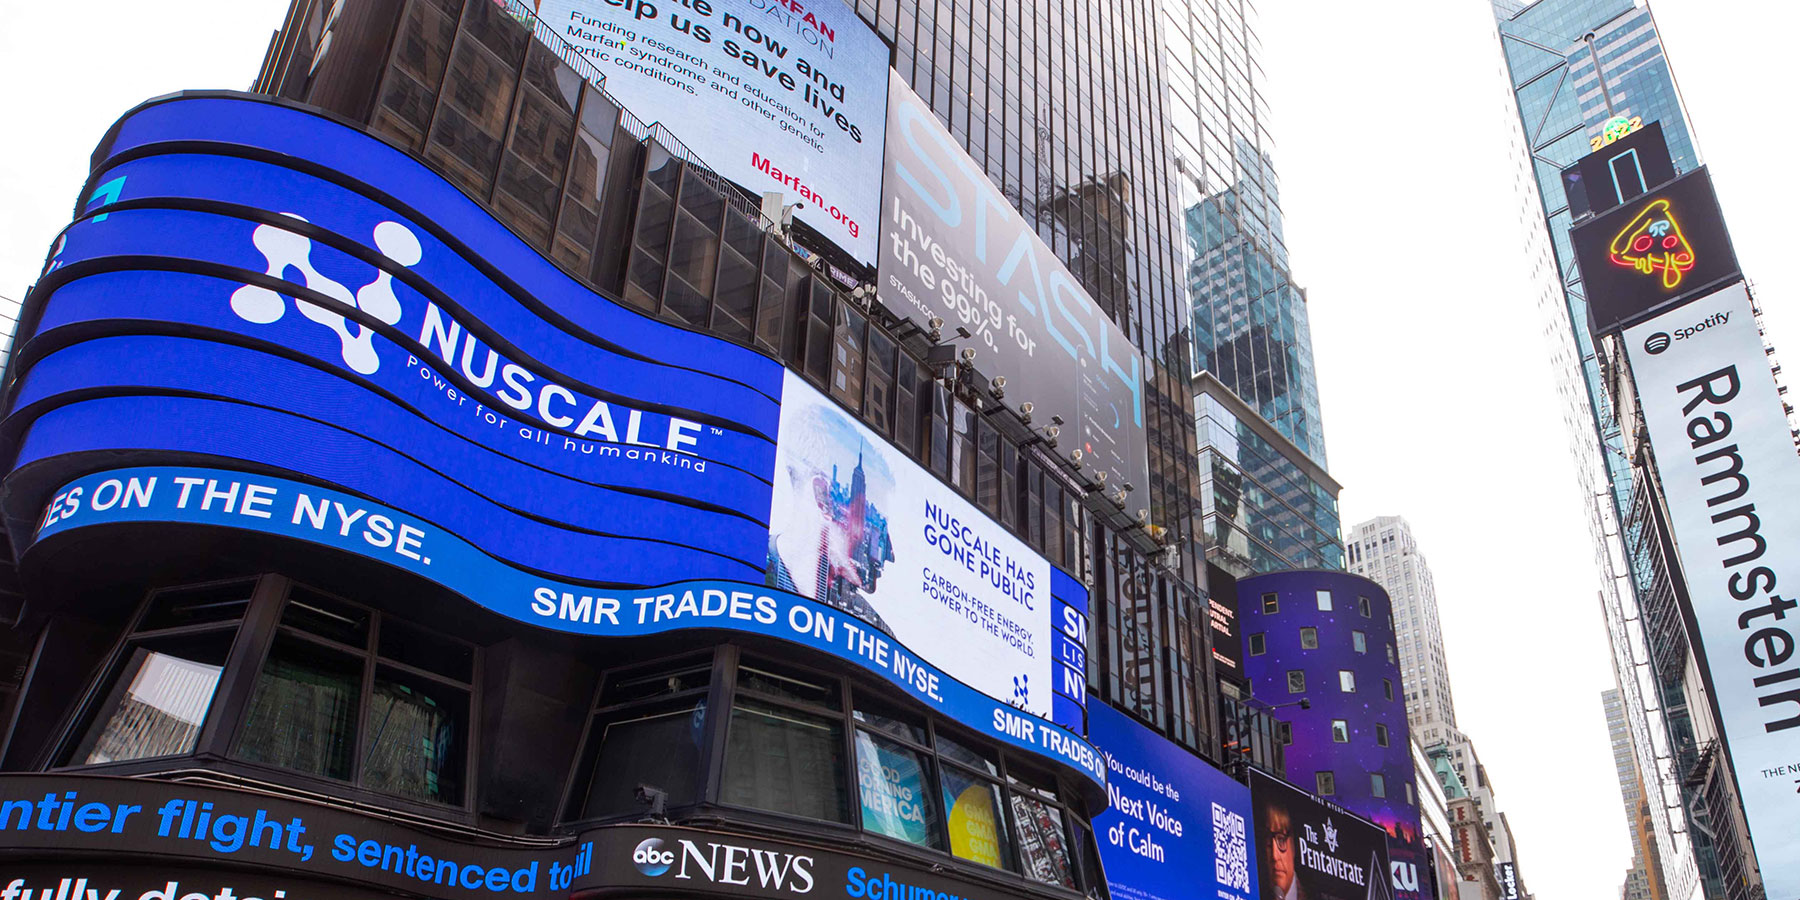 Exterior digital billbord displaying NuScale logo and going public announcement at NYSE. 